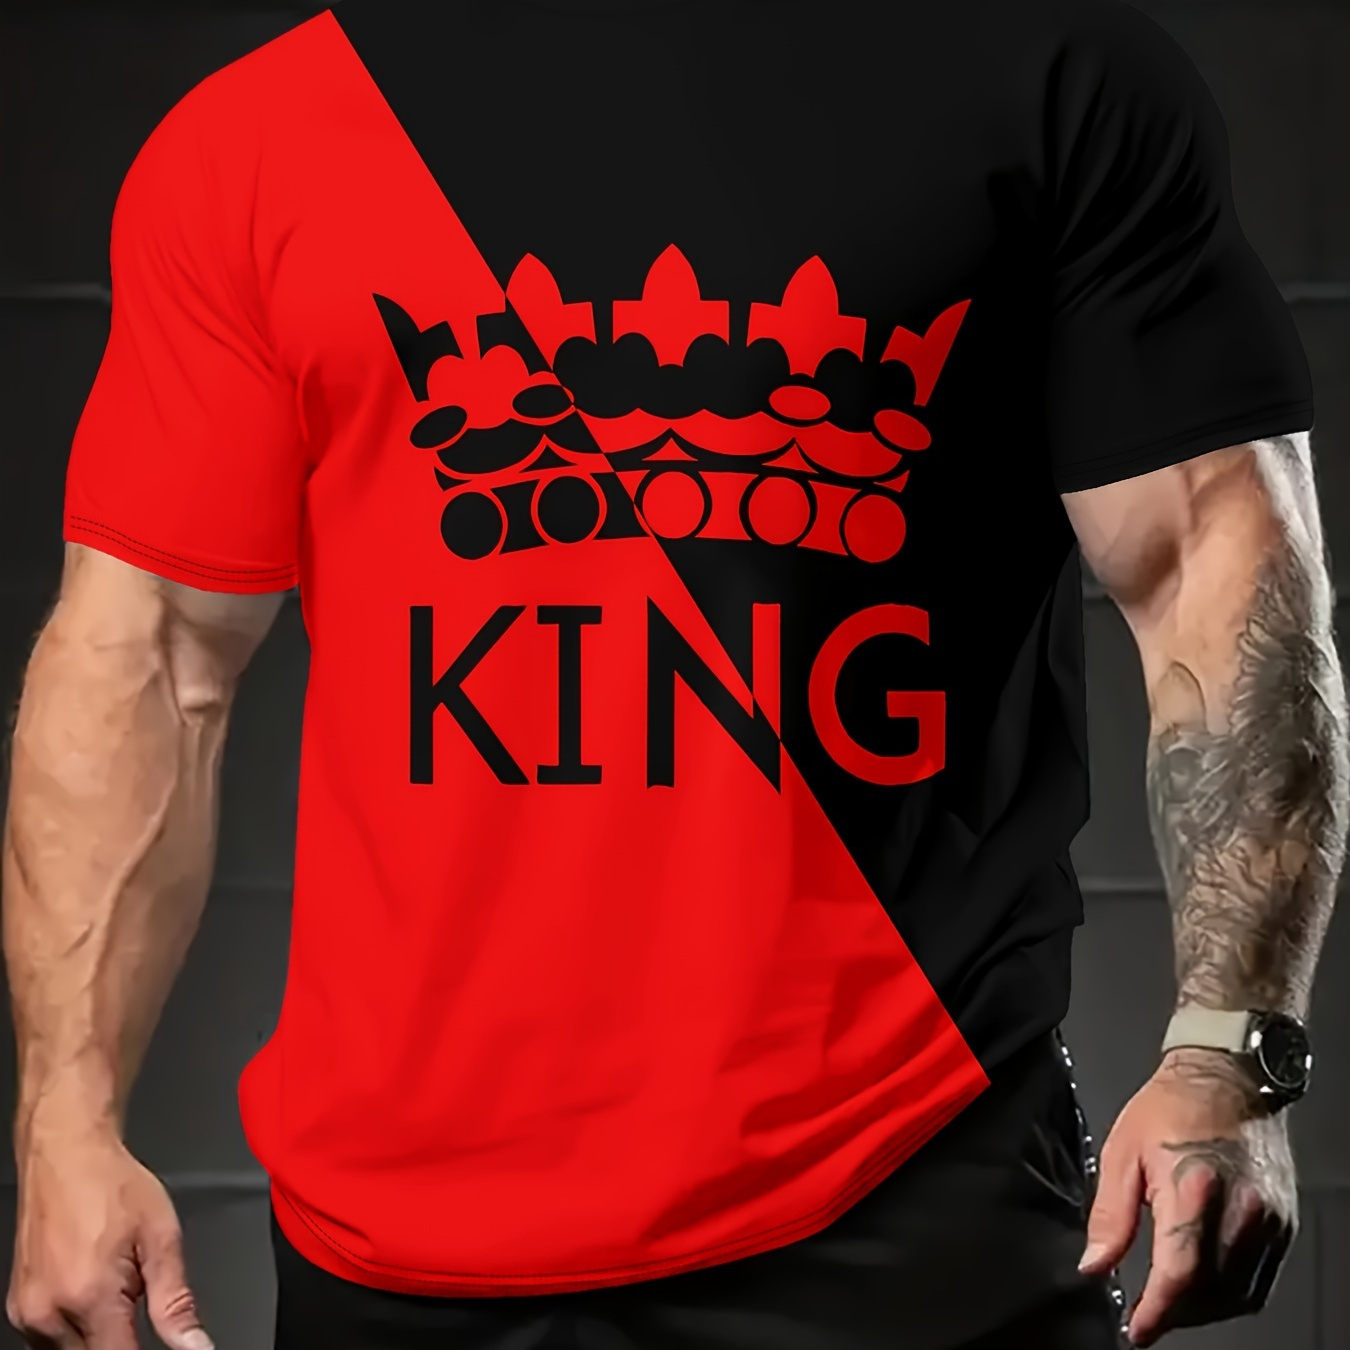 

Summer Men's Red And Black Patchwork Letters "king" Pattern, Comfortable Casual Fashion For Summer Leisure Out Of The Short-sleeved T-shirt Top